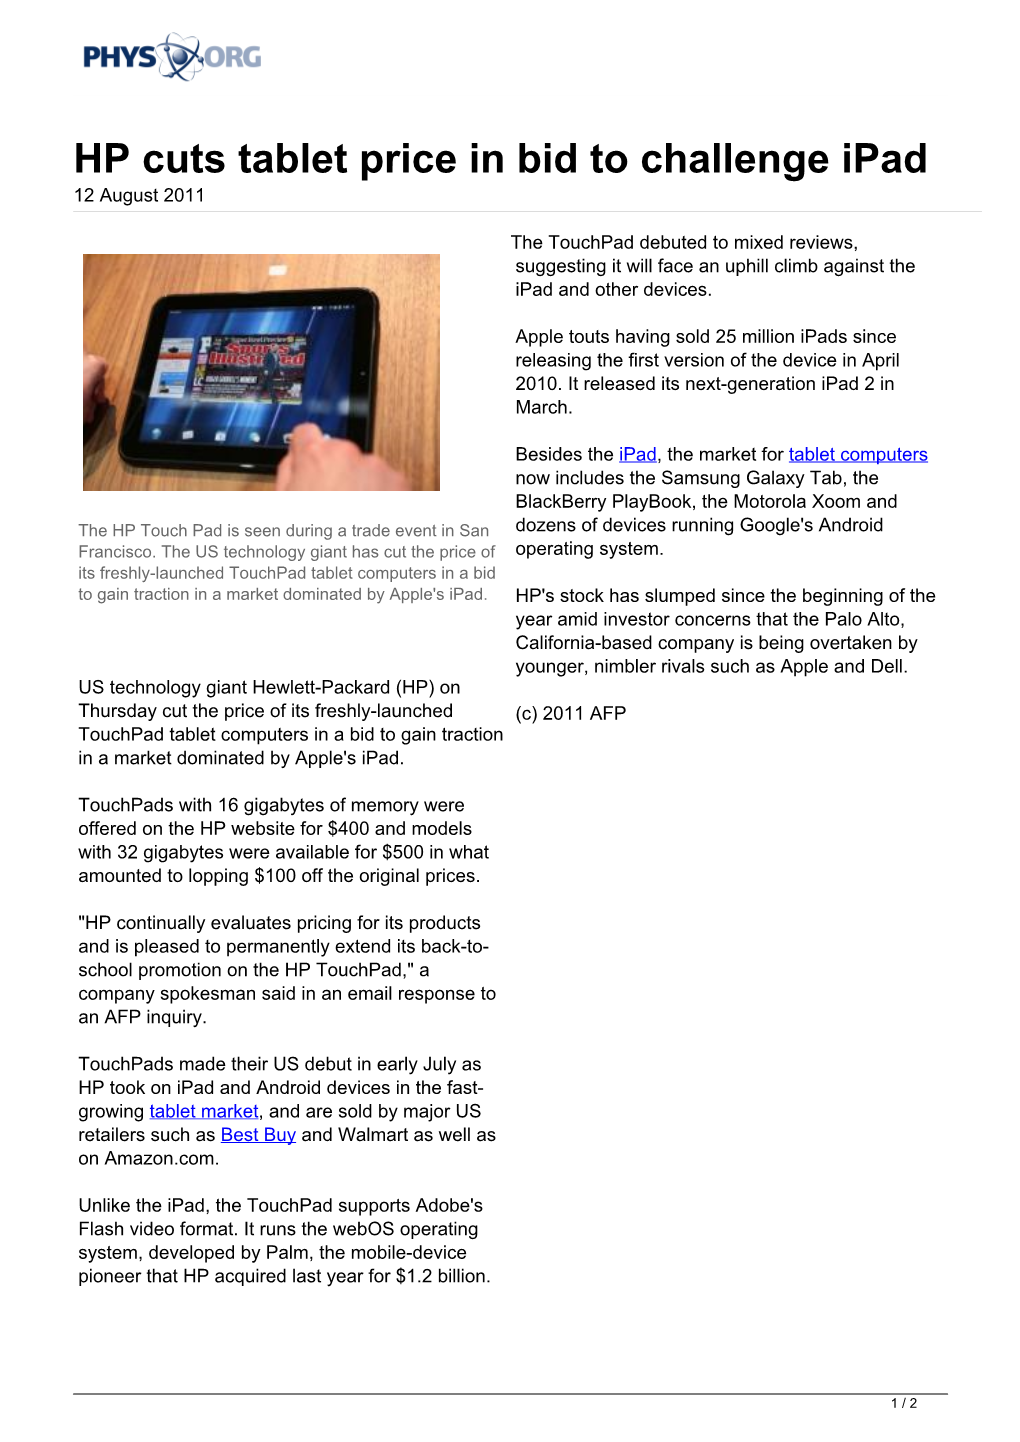 HP Cuts Tablet Price in Bid to Challenge Ipad 12 August 2011